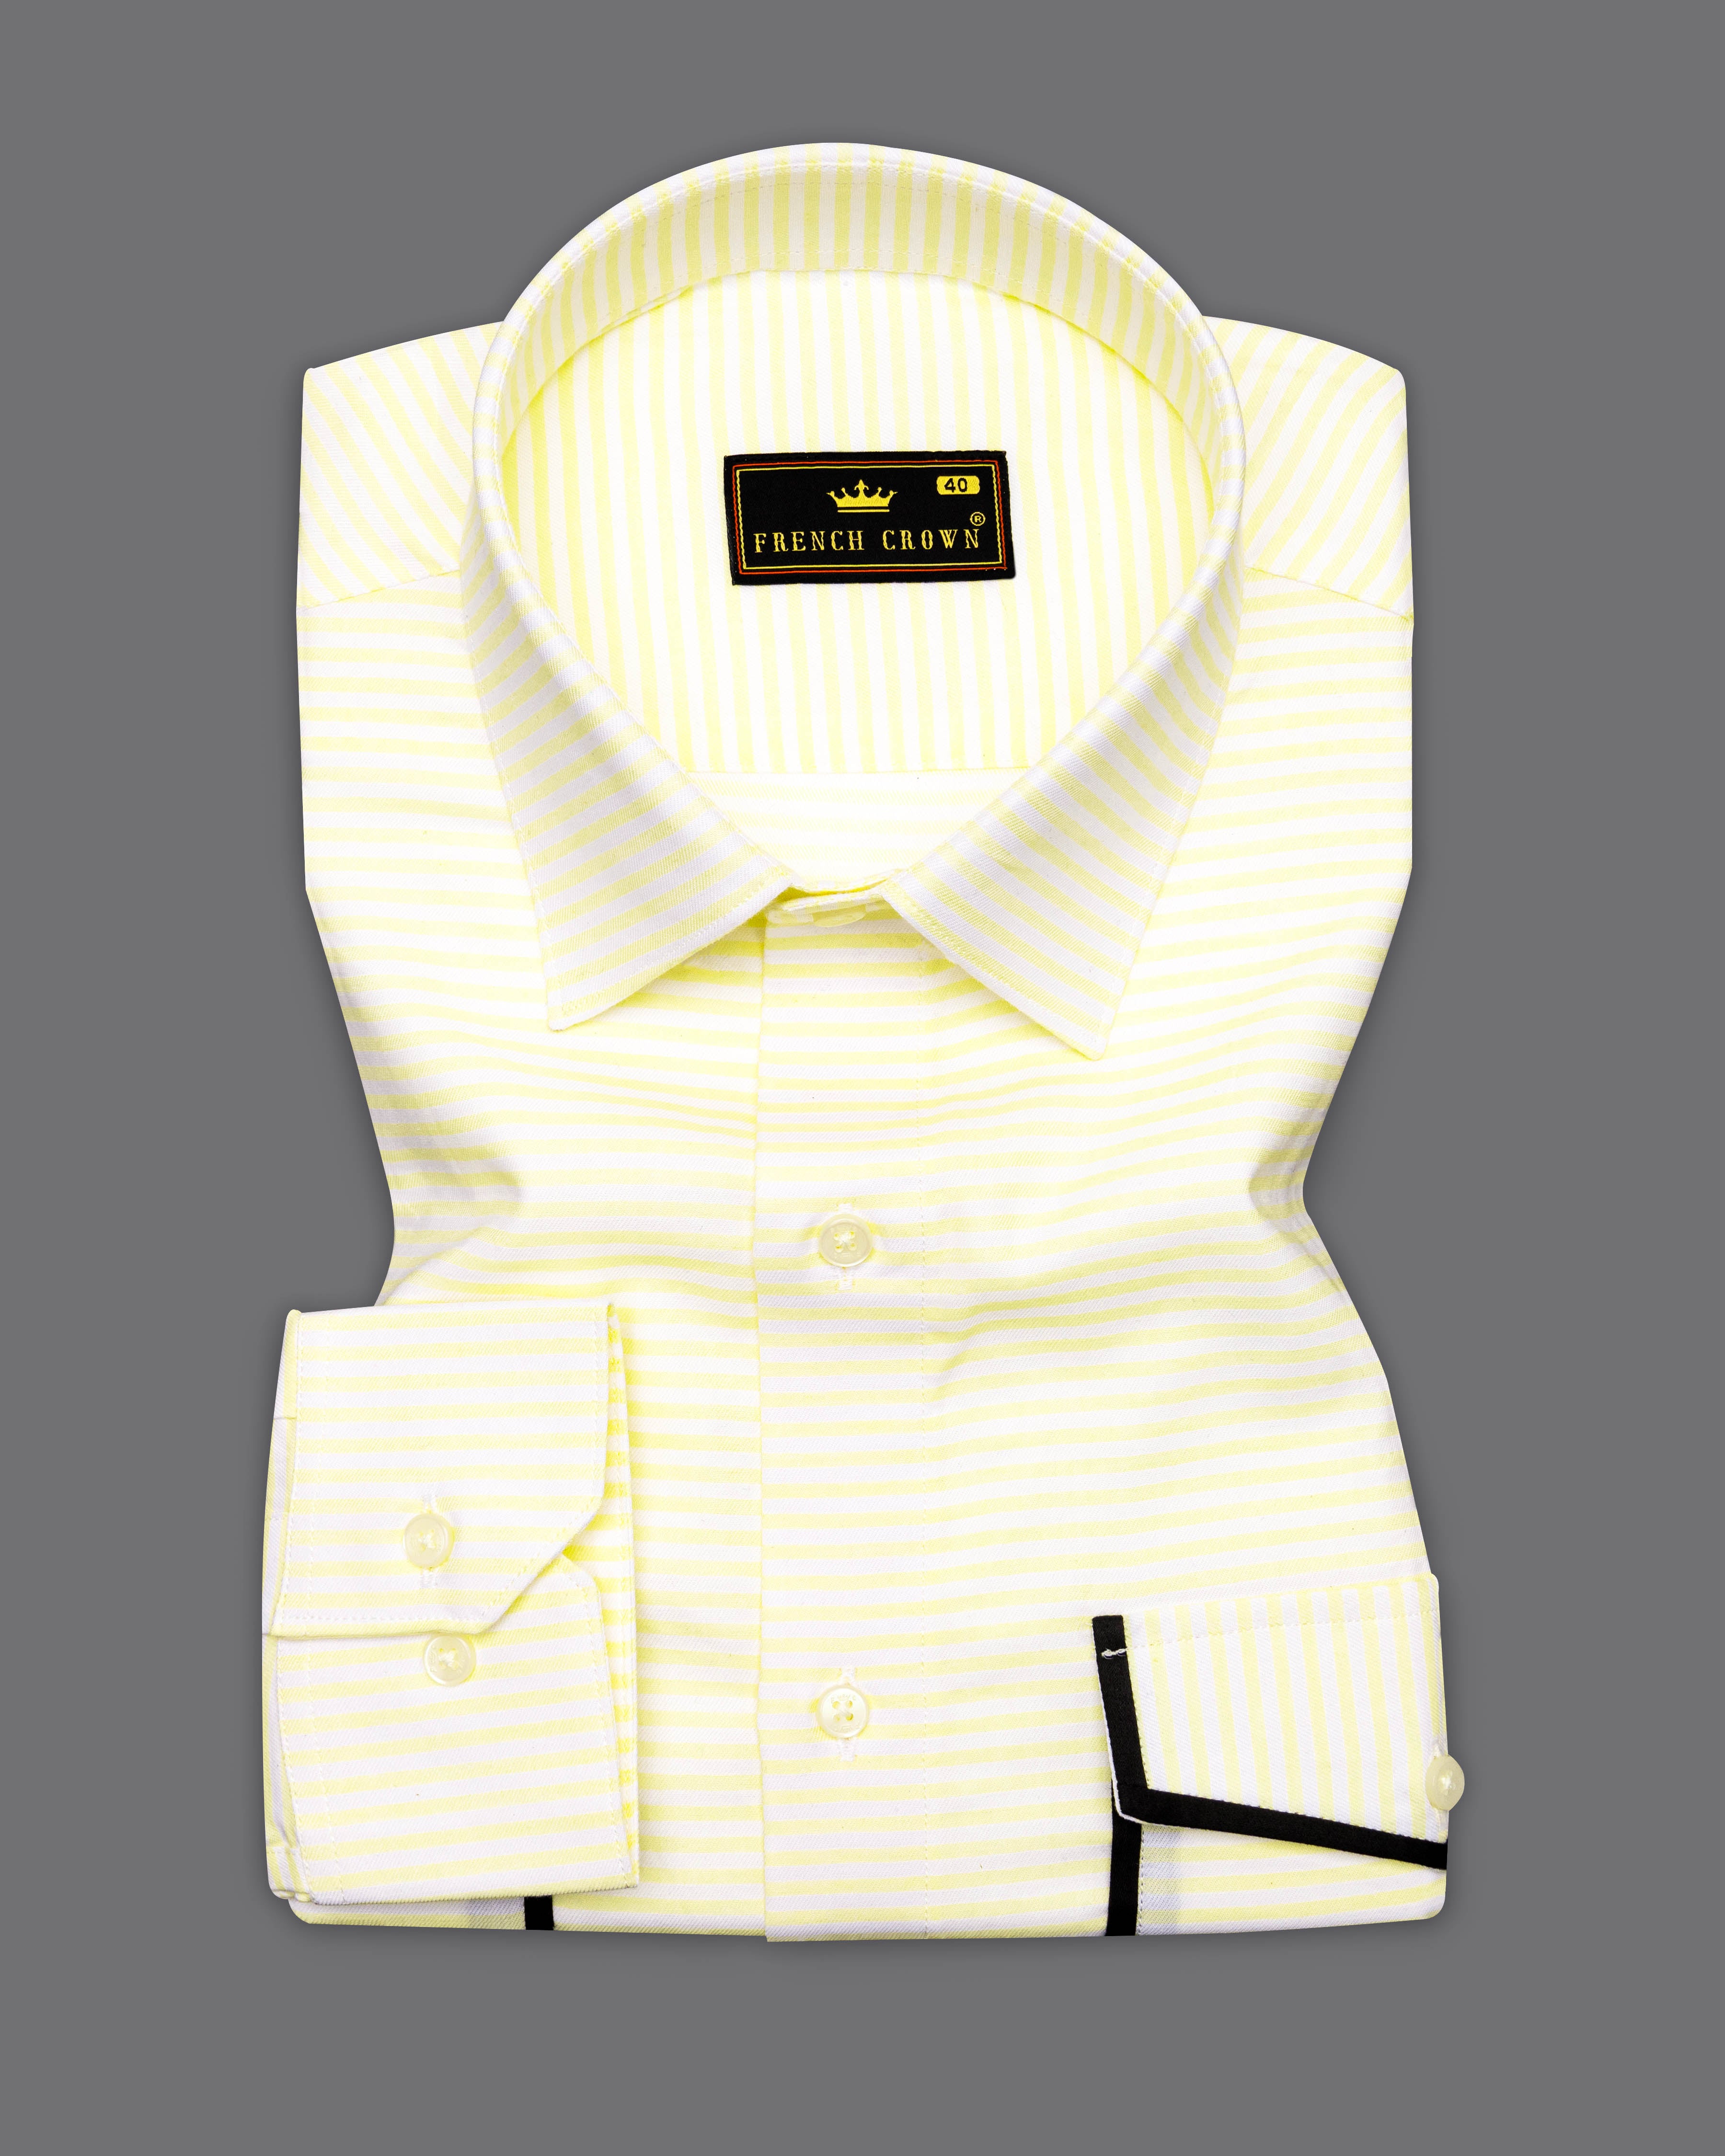 Oasis Yellow and White Striped with Black Piping Work Twill Premium Cotton Shirt 9539-D21-38, 9539-D21-H-38, 9539-D21-39, 9539-D21-H-39, 9539-D21-40, 9539-D21-H-40, 9539-D21-42, 9539-D21-H-42, 9539-D21-44, 9539-D21-H-44, 9539-D21-46, 9539-D21-H-46, 9539-D21-48, 9539-D21-H-48, 9539-D21-50, 9539-D21-H-50, 9539-D21-52, 9539-D21-H-52